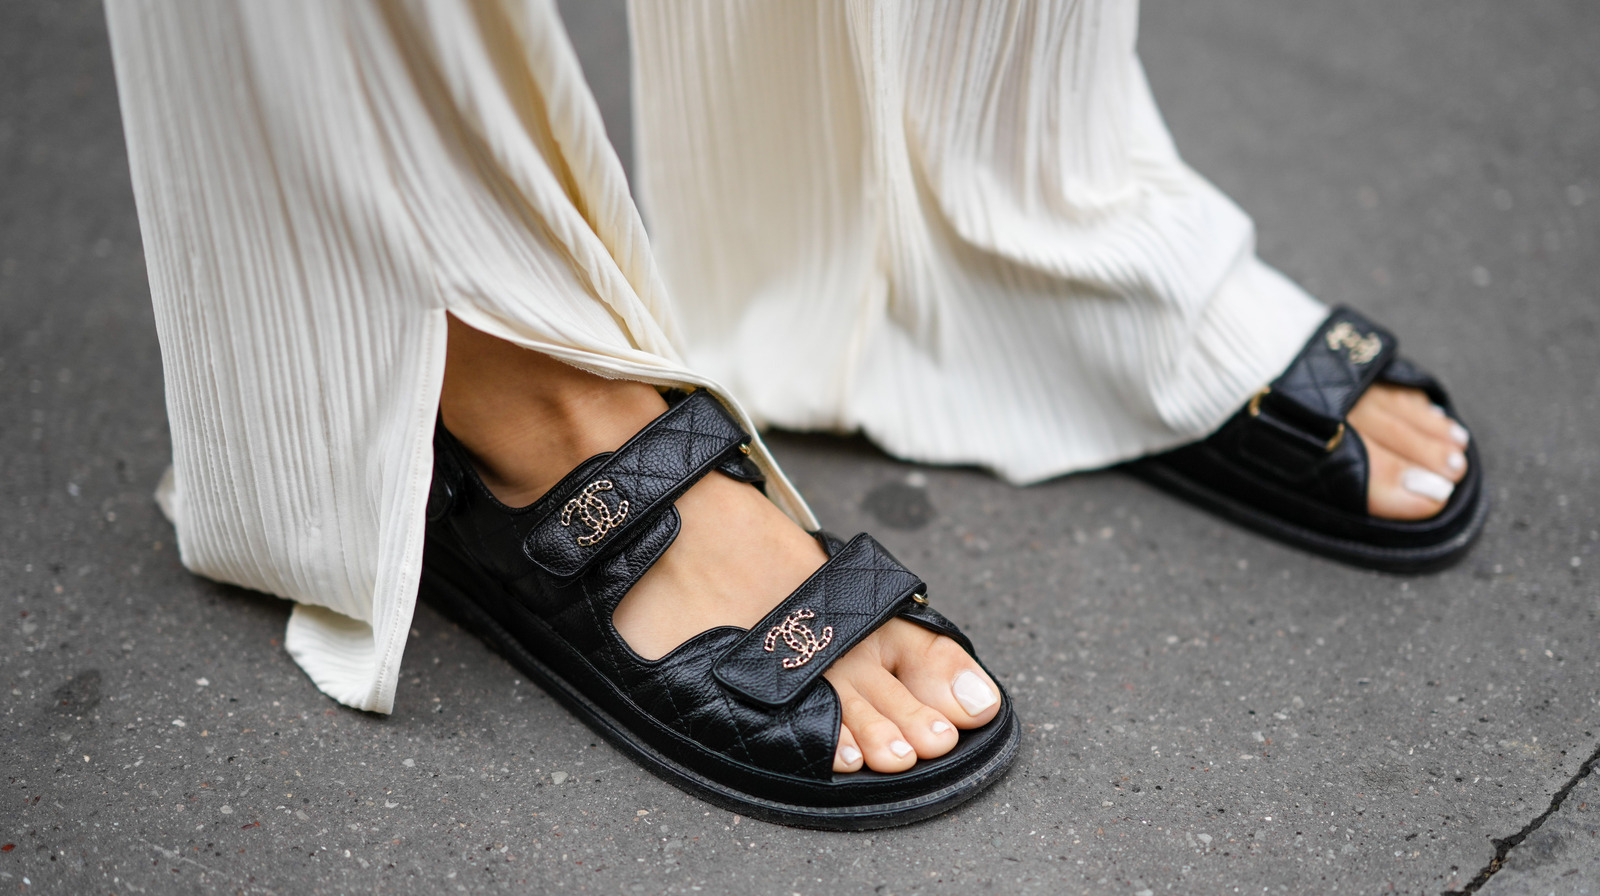 Dad Sandals The Comfortable Summer Shoe Trend Being Remixed Right Now